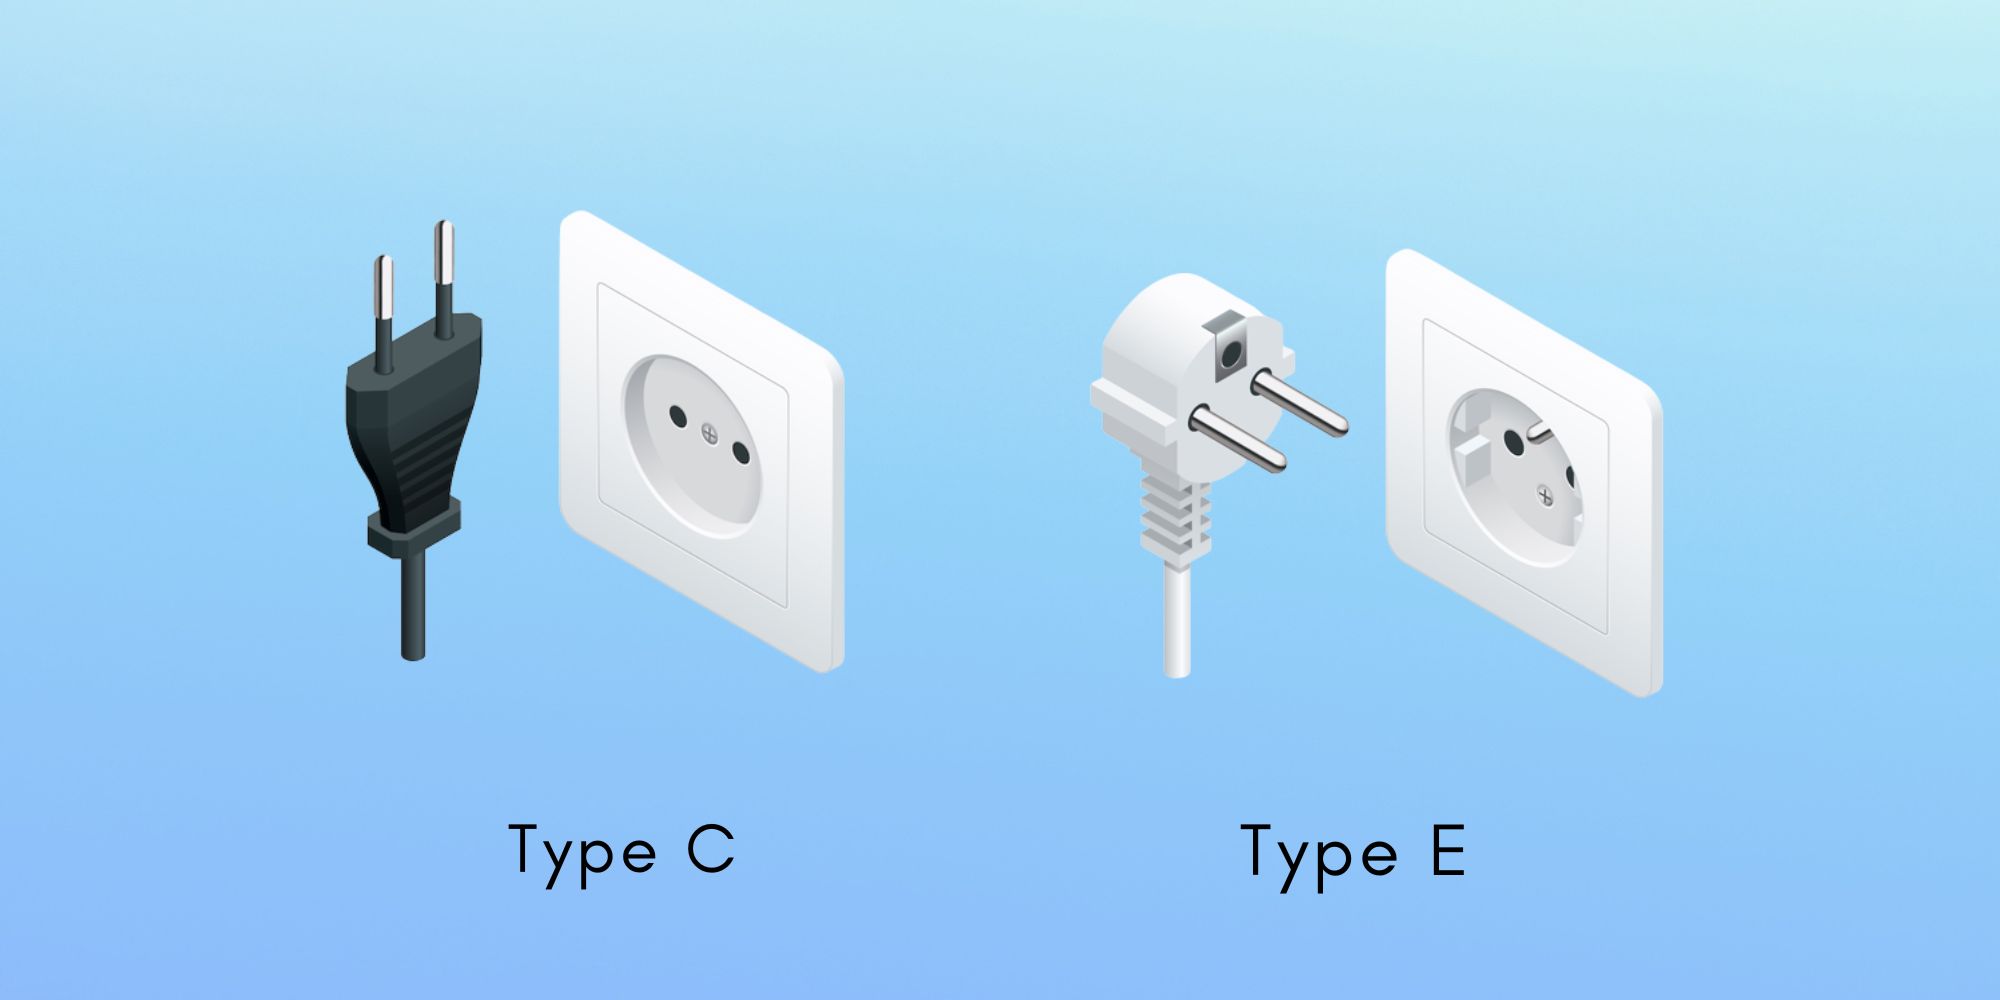 Mali Power Plugs and Sockets: Type C and Type E
